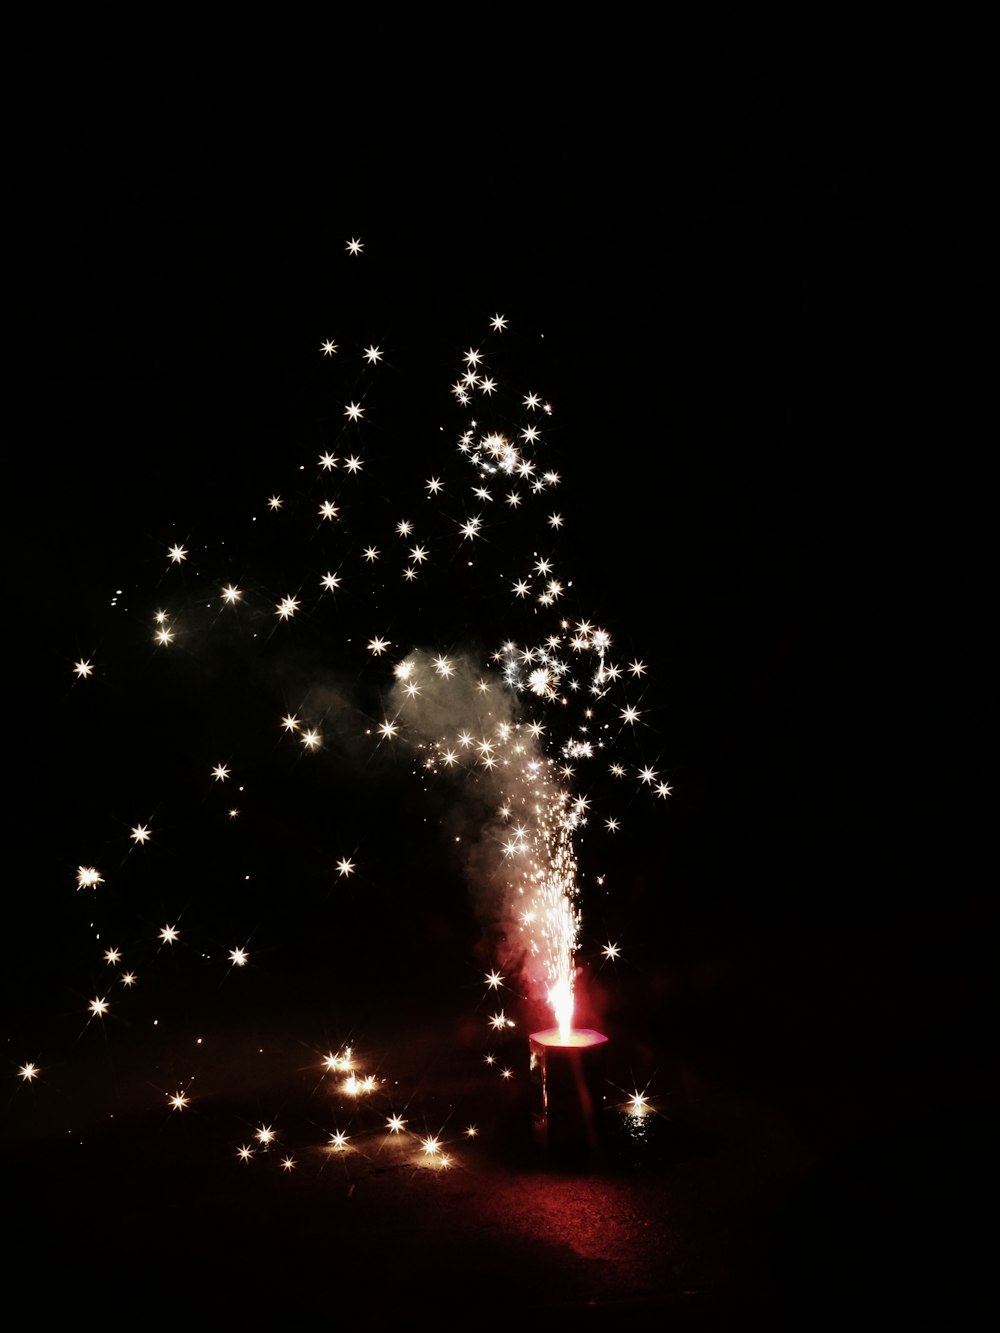 a large fireworks is lit up in the dark